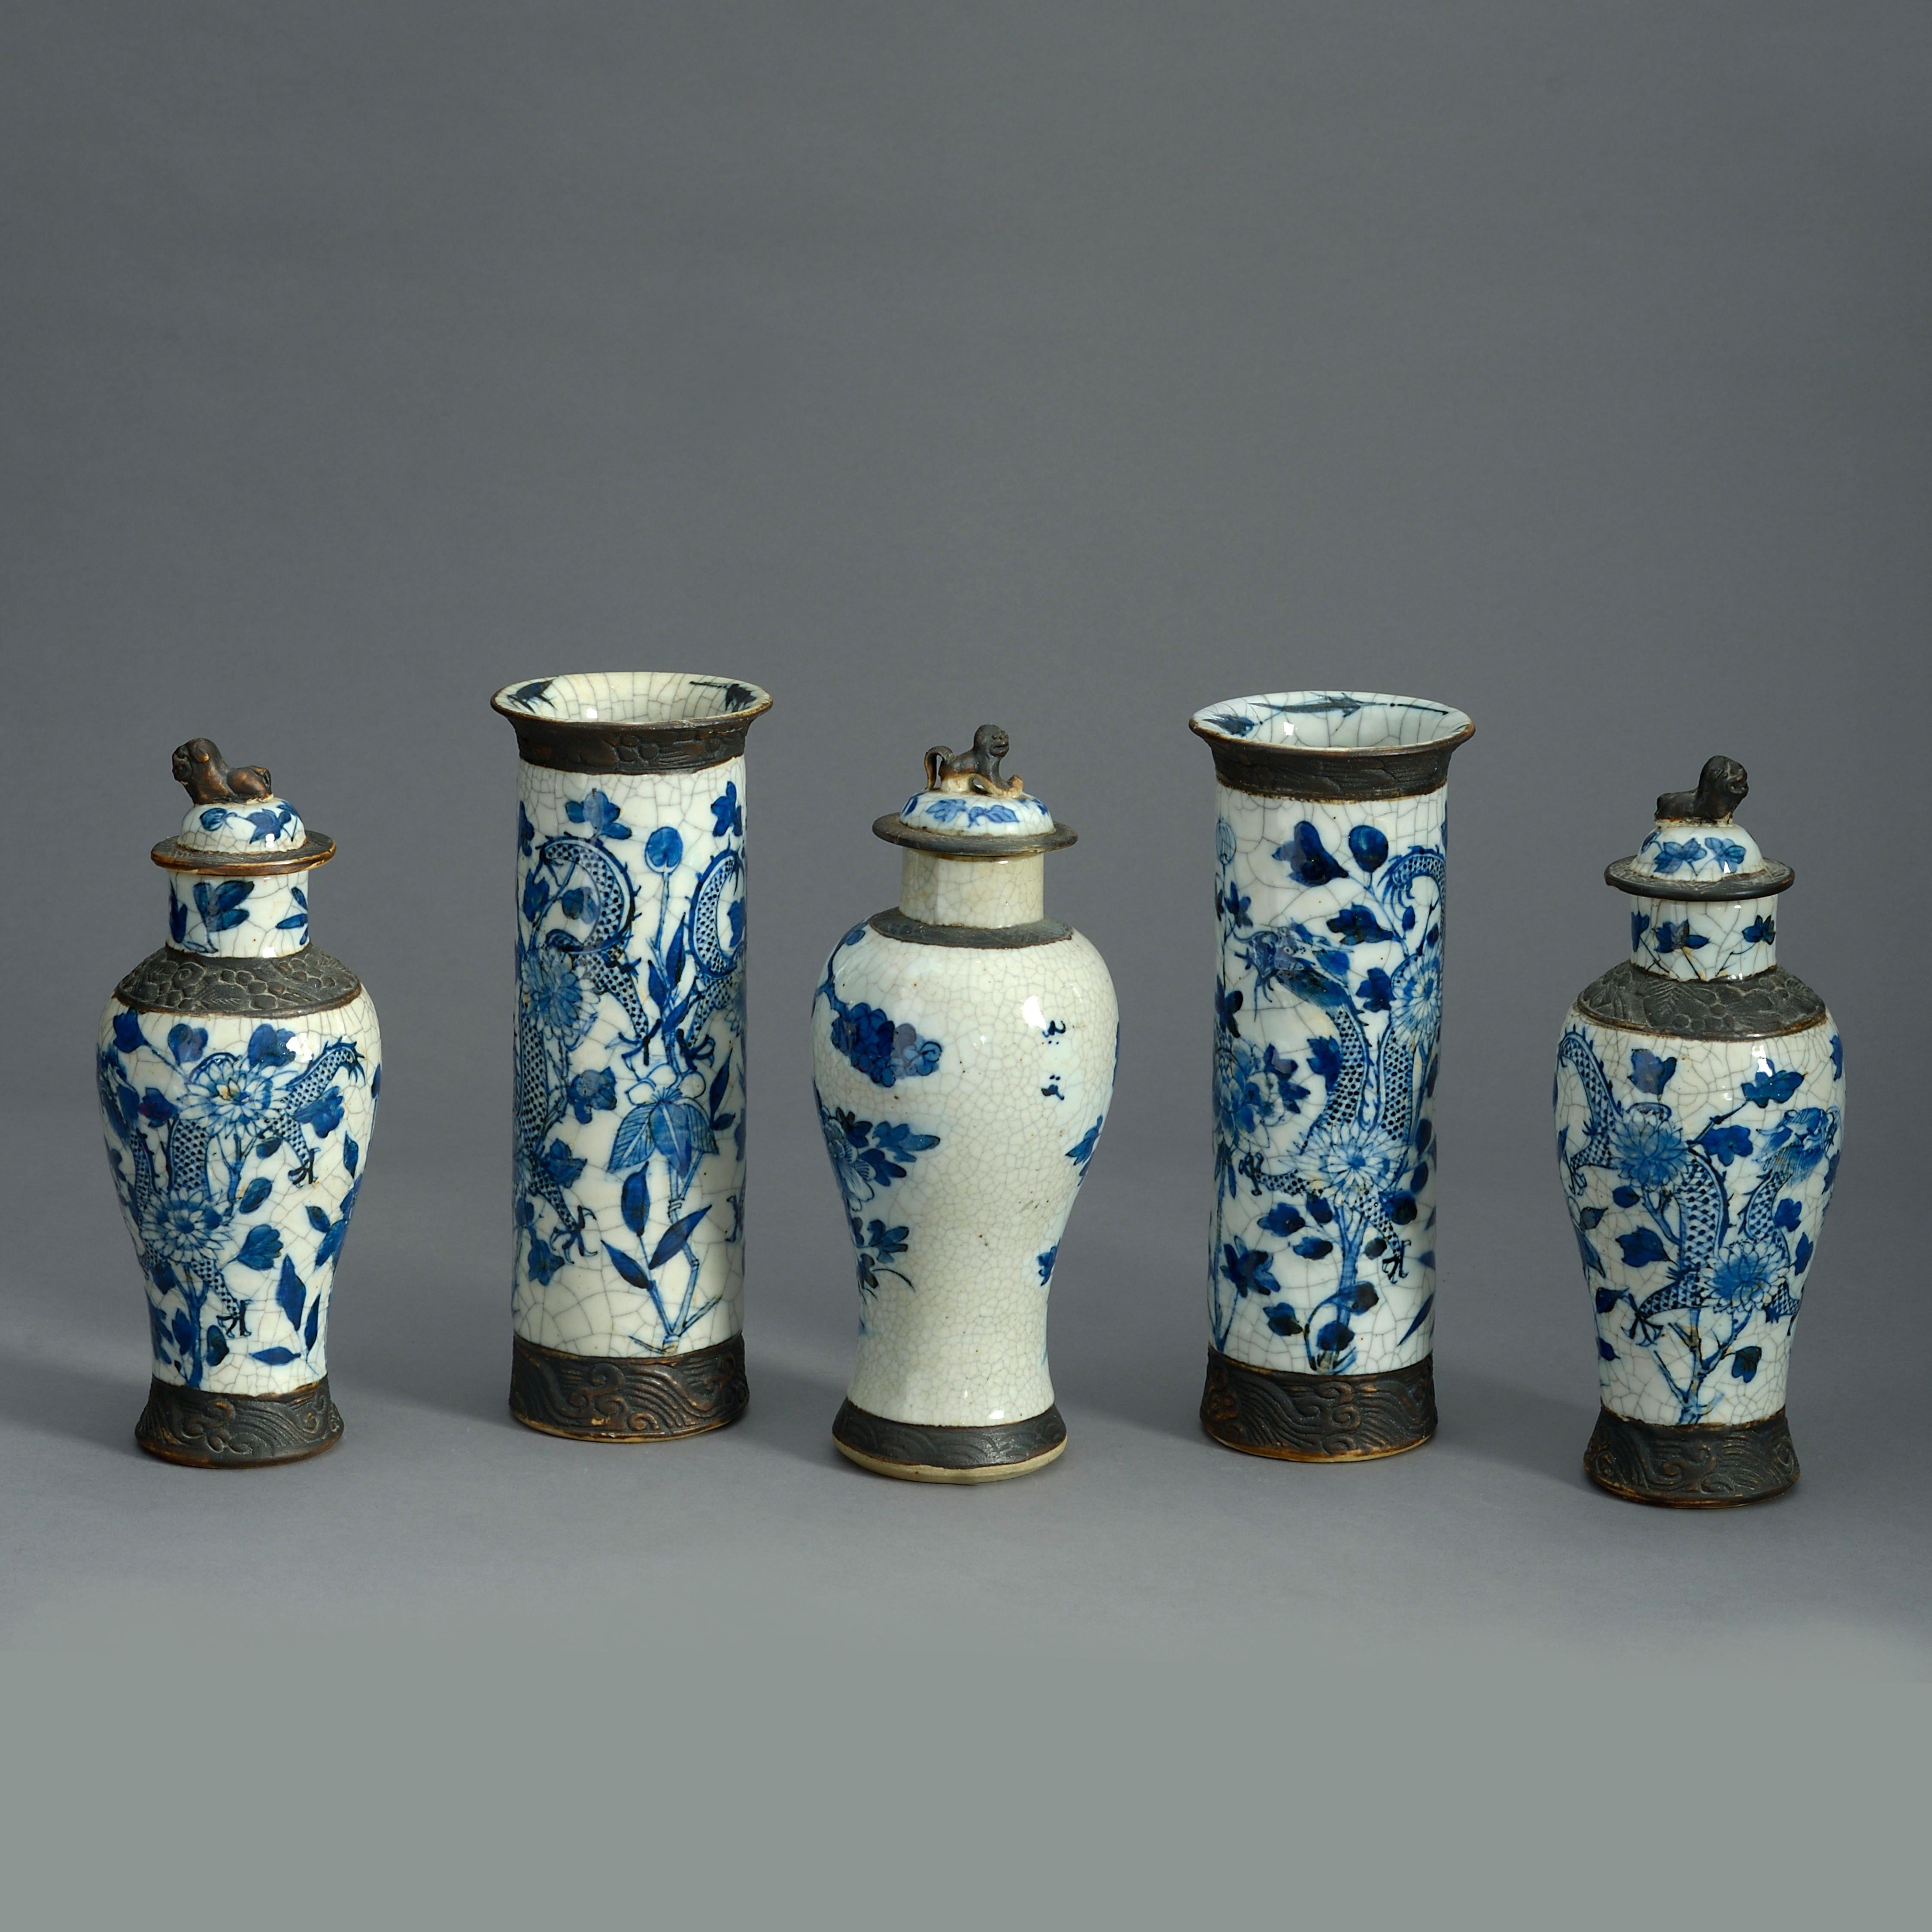 A nineteenth century blue and white and faux bronze crackleware garniture of five matched vases, comprising three lidded and two trumpet vases.

Dimensions refer to tallest vases.